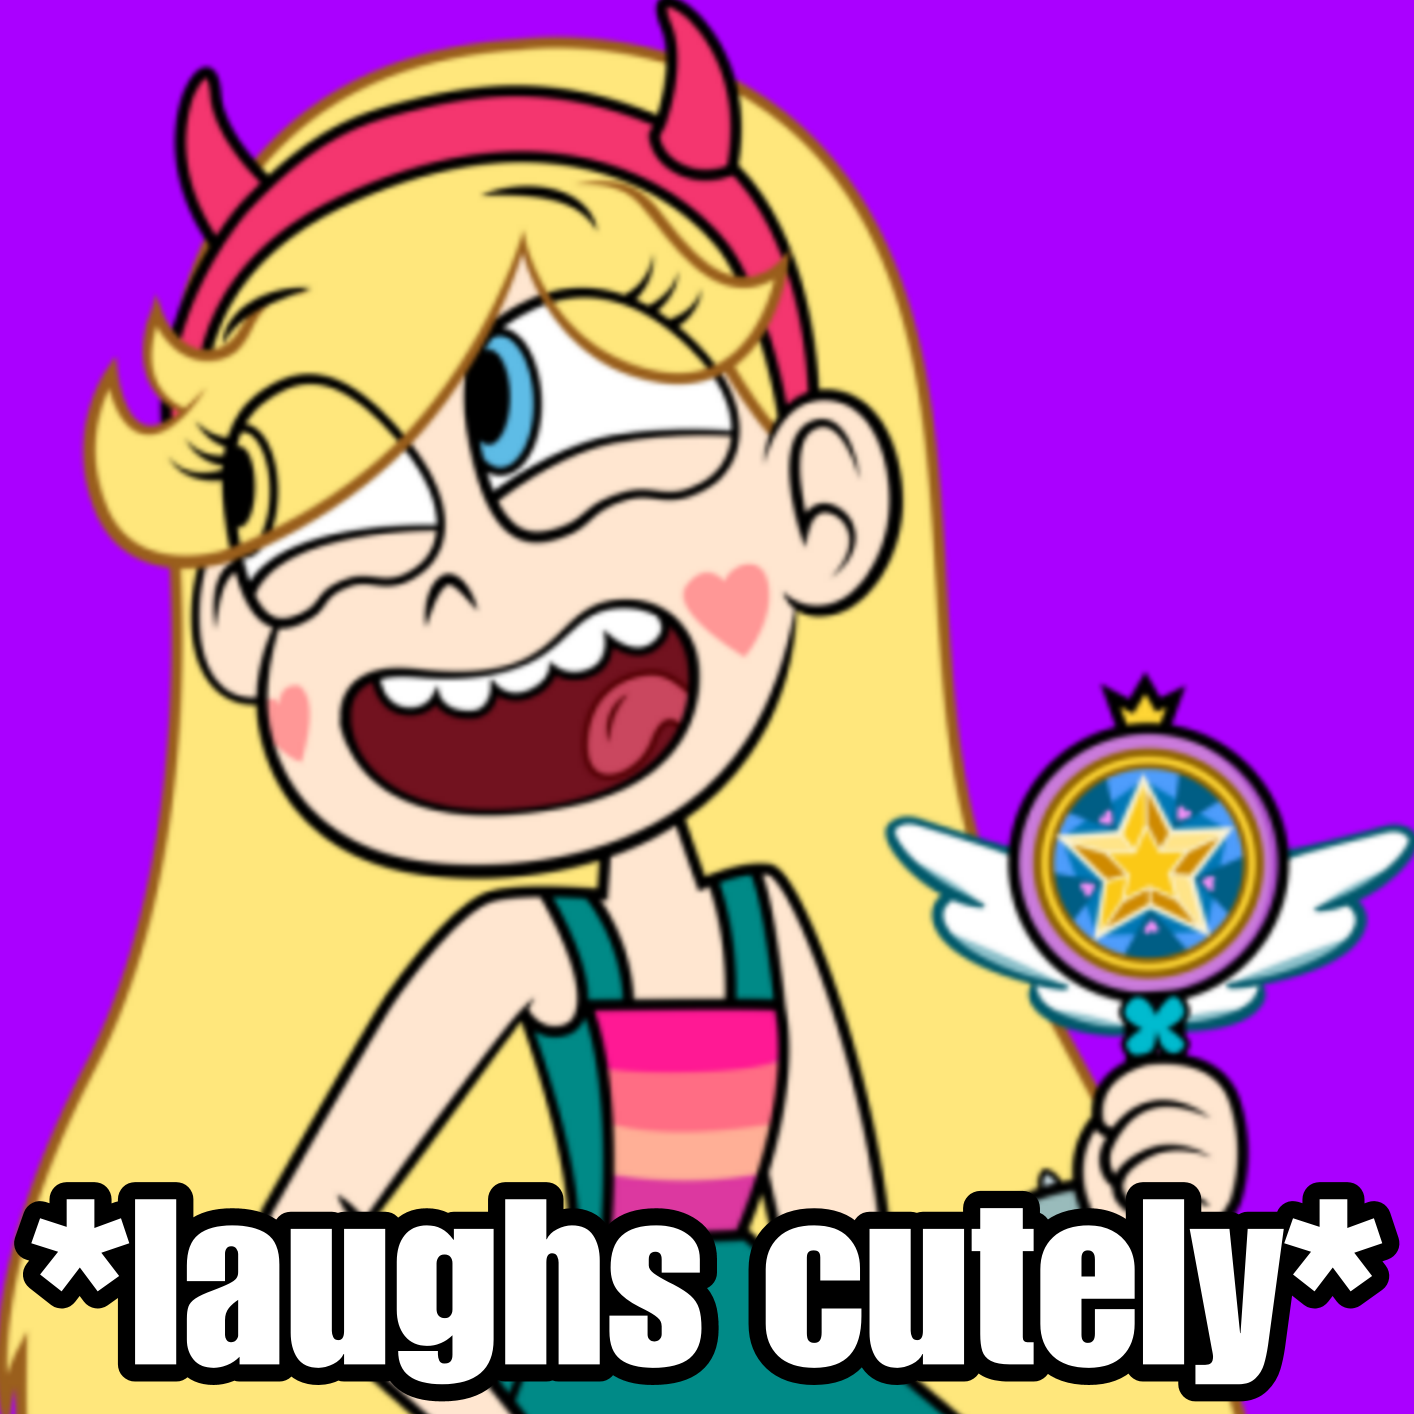 Star butterfly laughs cutely Blank Meme Template